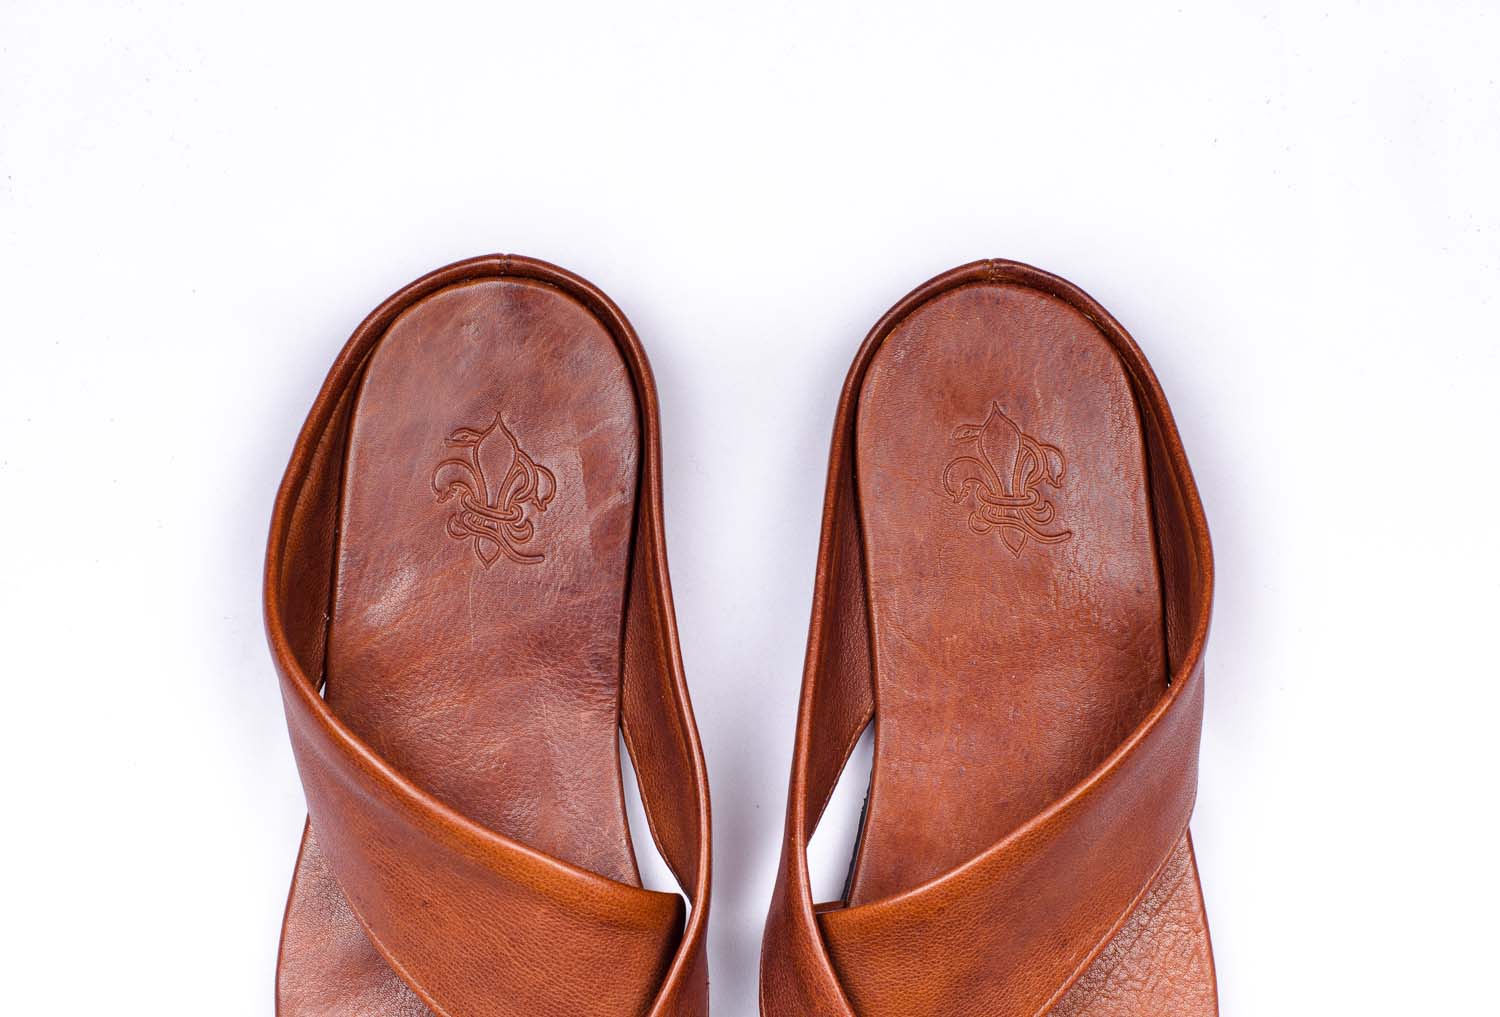 Tan calf leather sandals